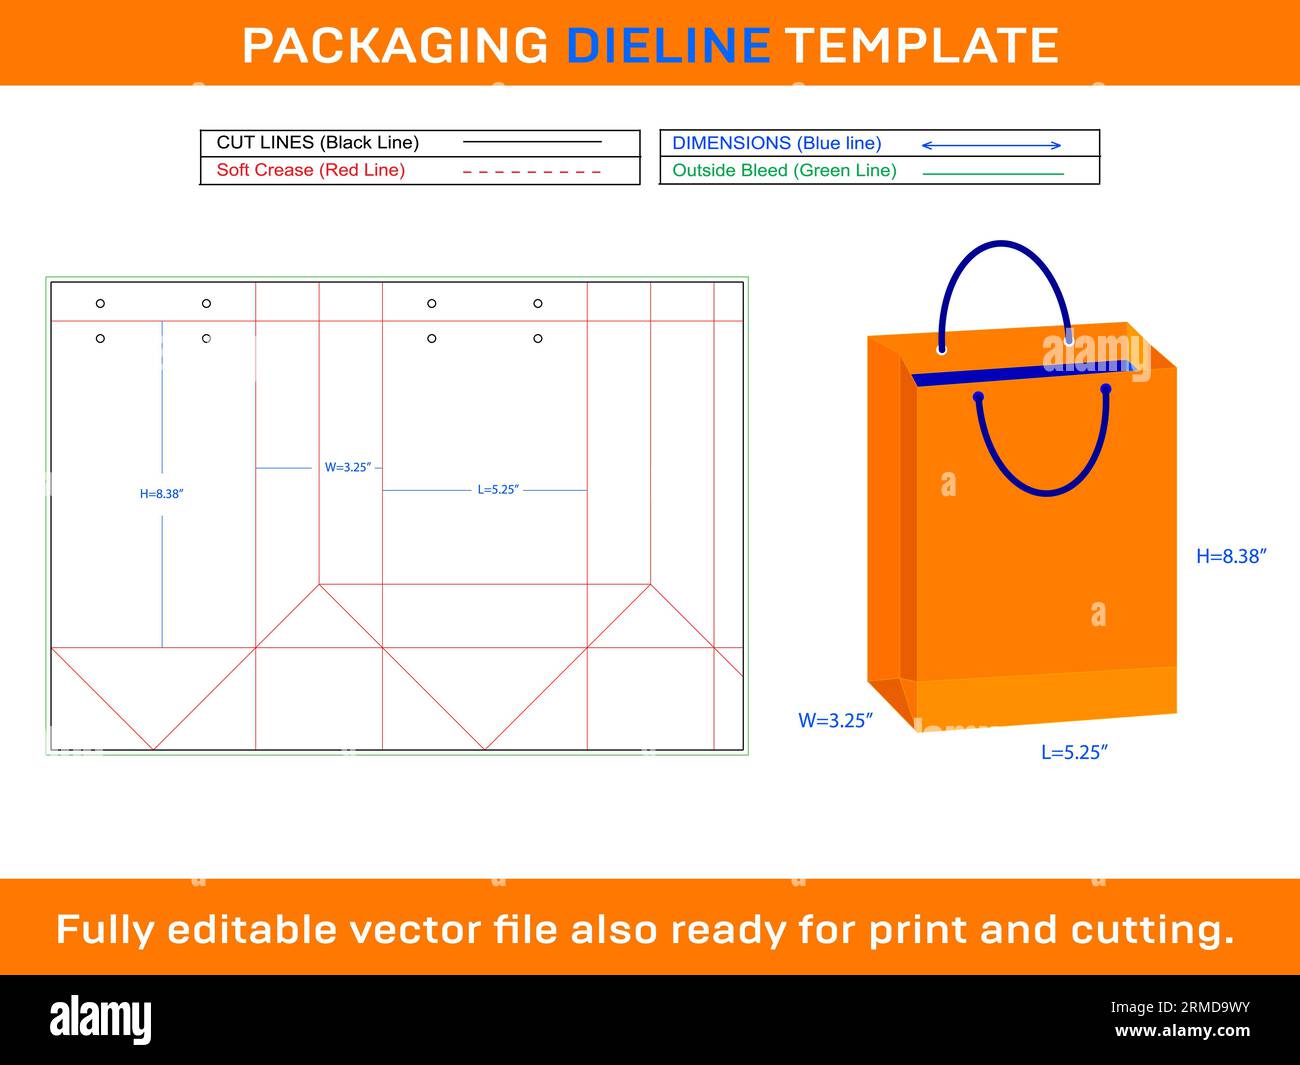 Shopping bag Dieline Template 5.25x3.25x8.38 inch Stock Vector